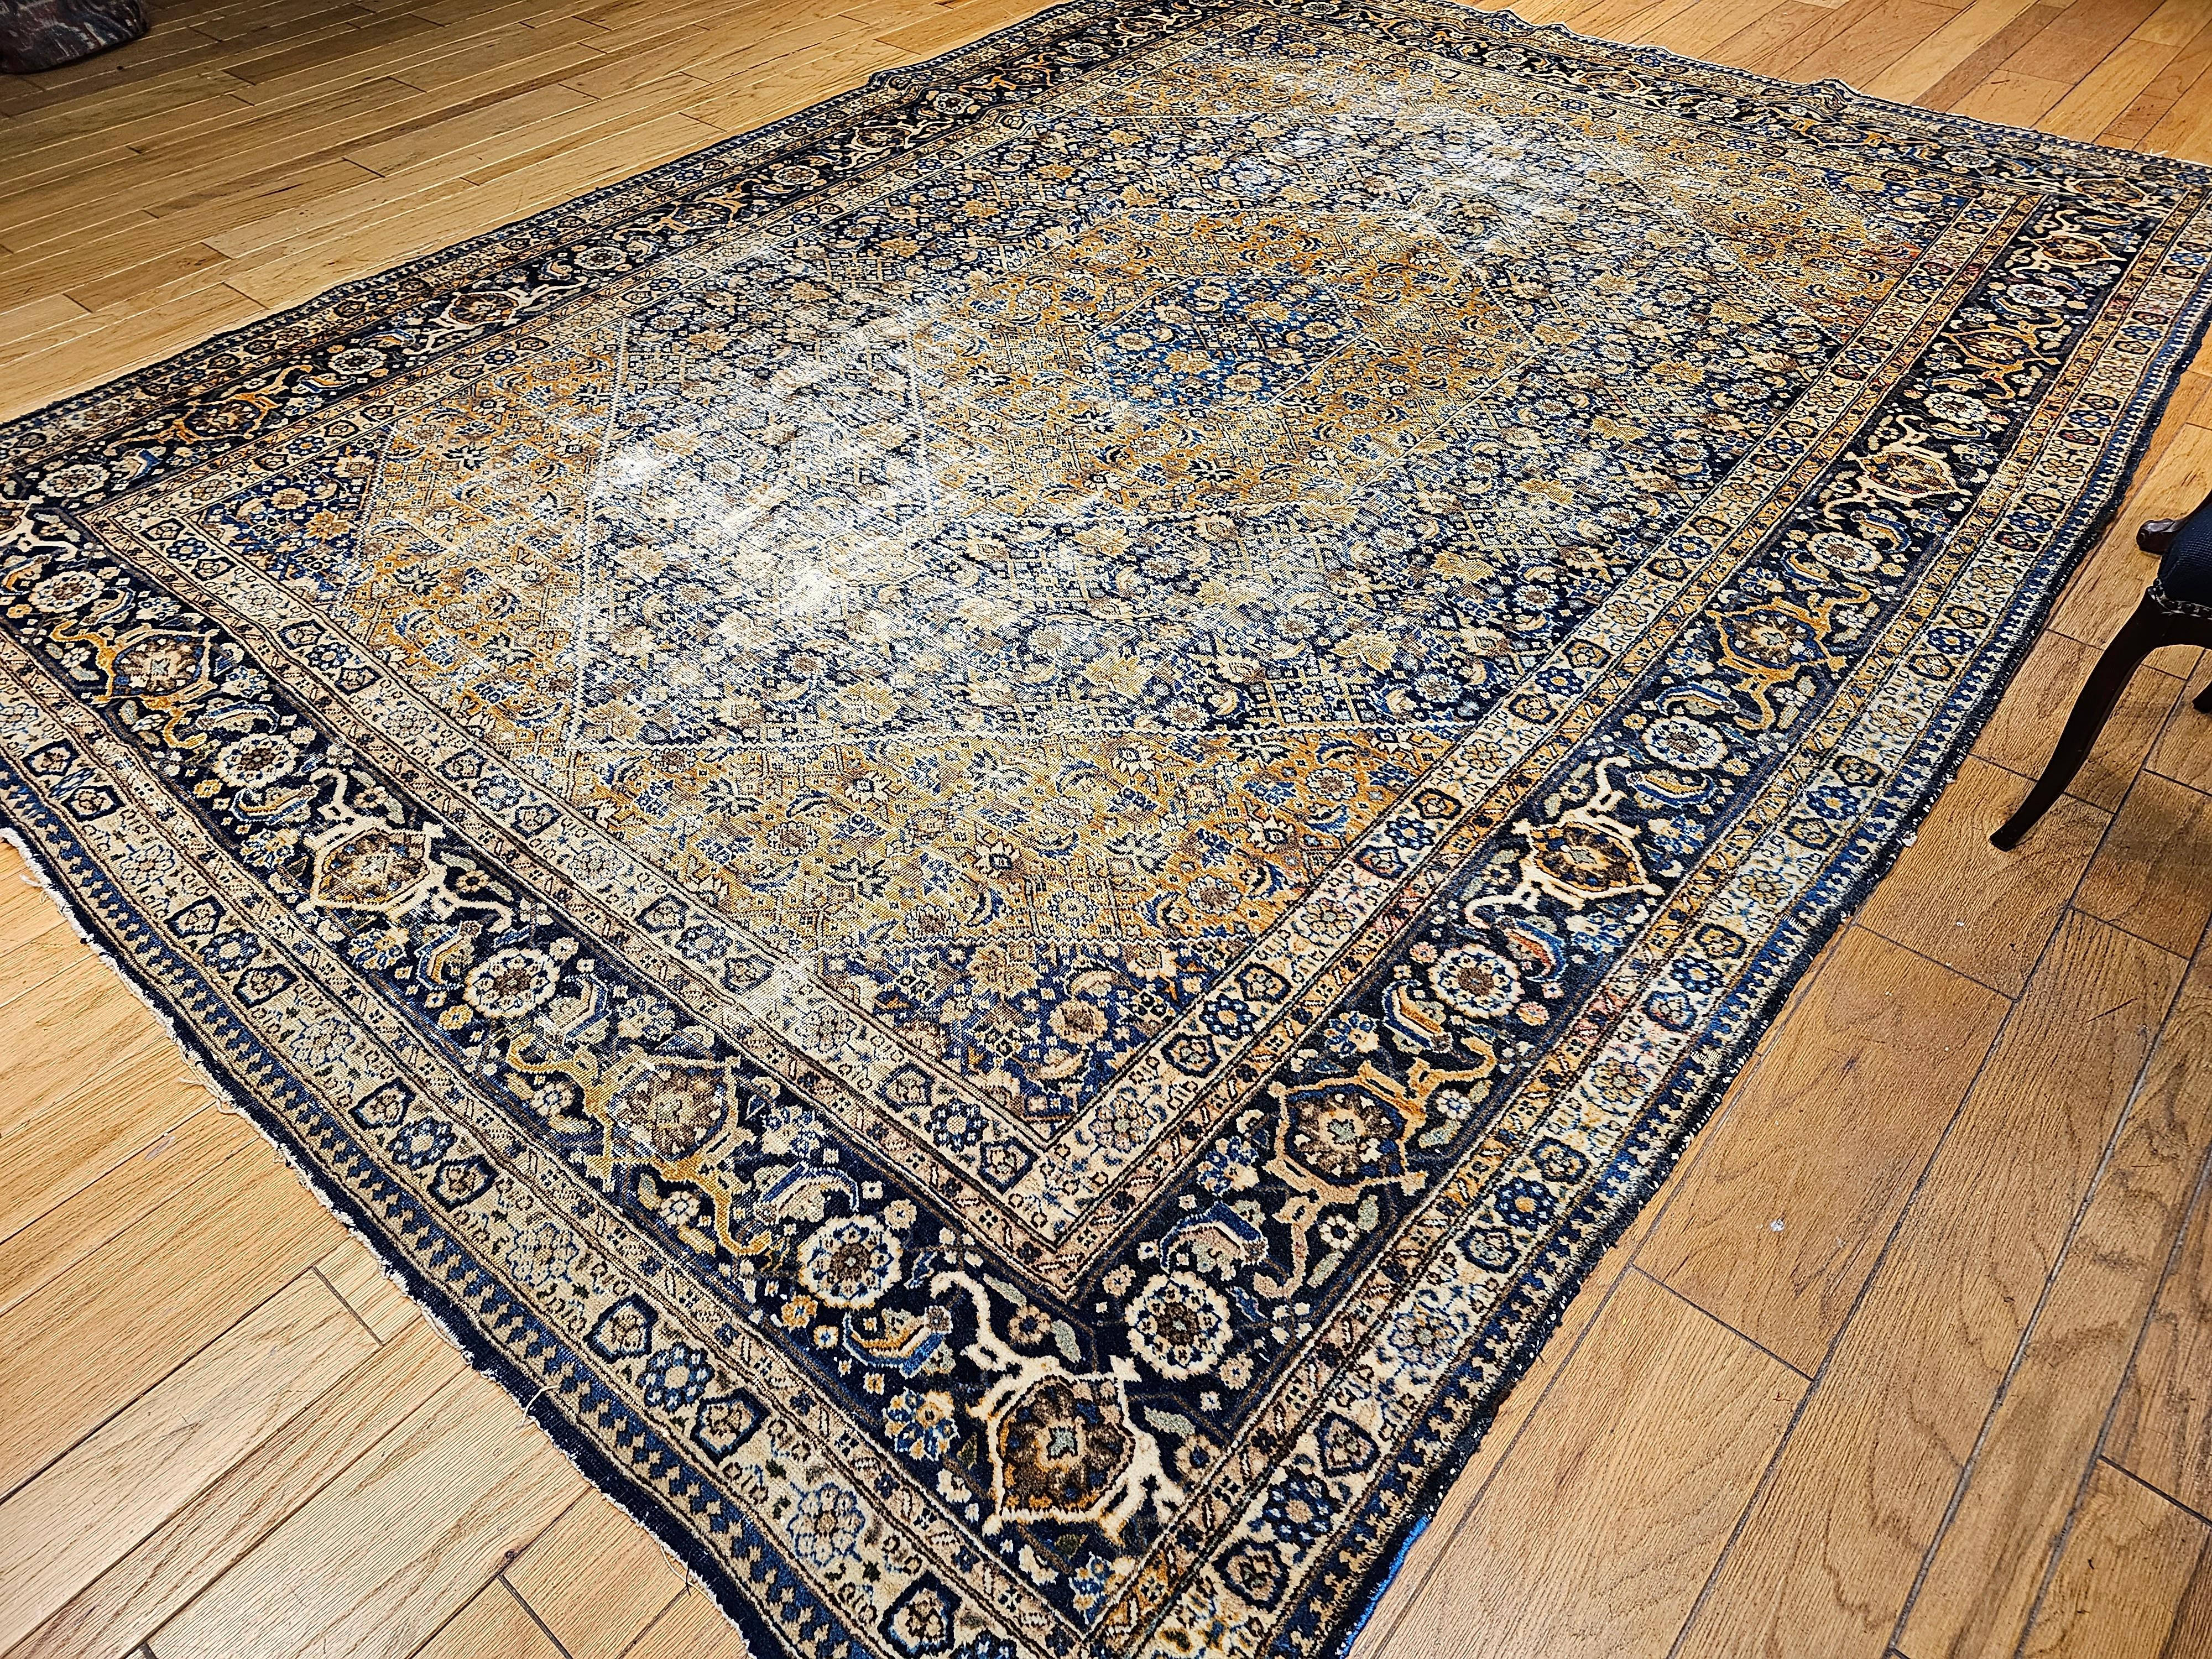 Vintage Persian Tabriz in Geometric Mahi Pattern in French Blue, Navy, Camel For Sale 4